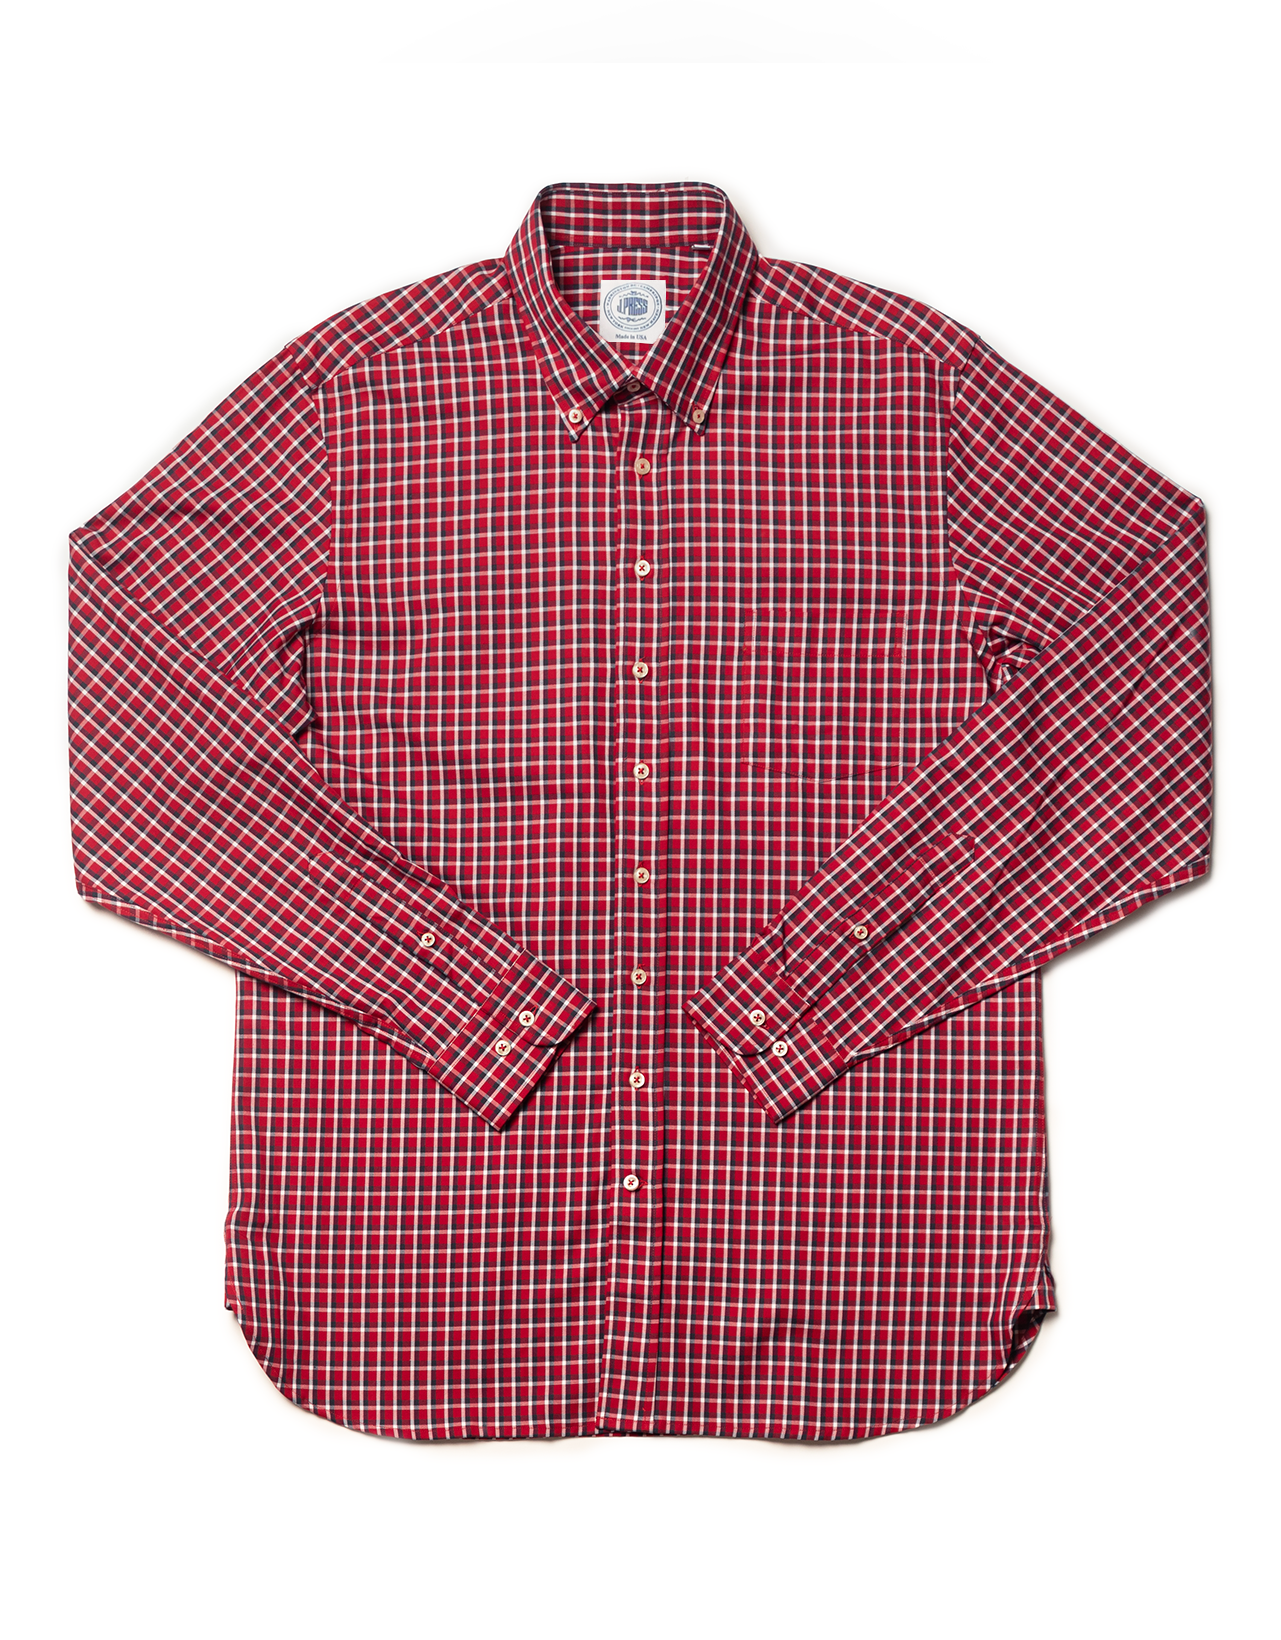 RED WITH NAVY/WHITE PANE COTTON/MODAL LONGSLEEVE SPORT SHIRT